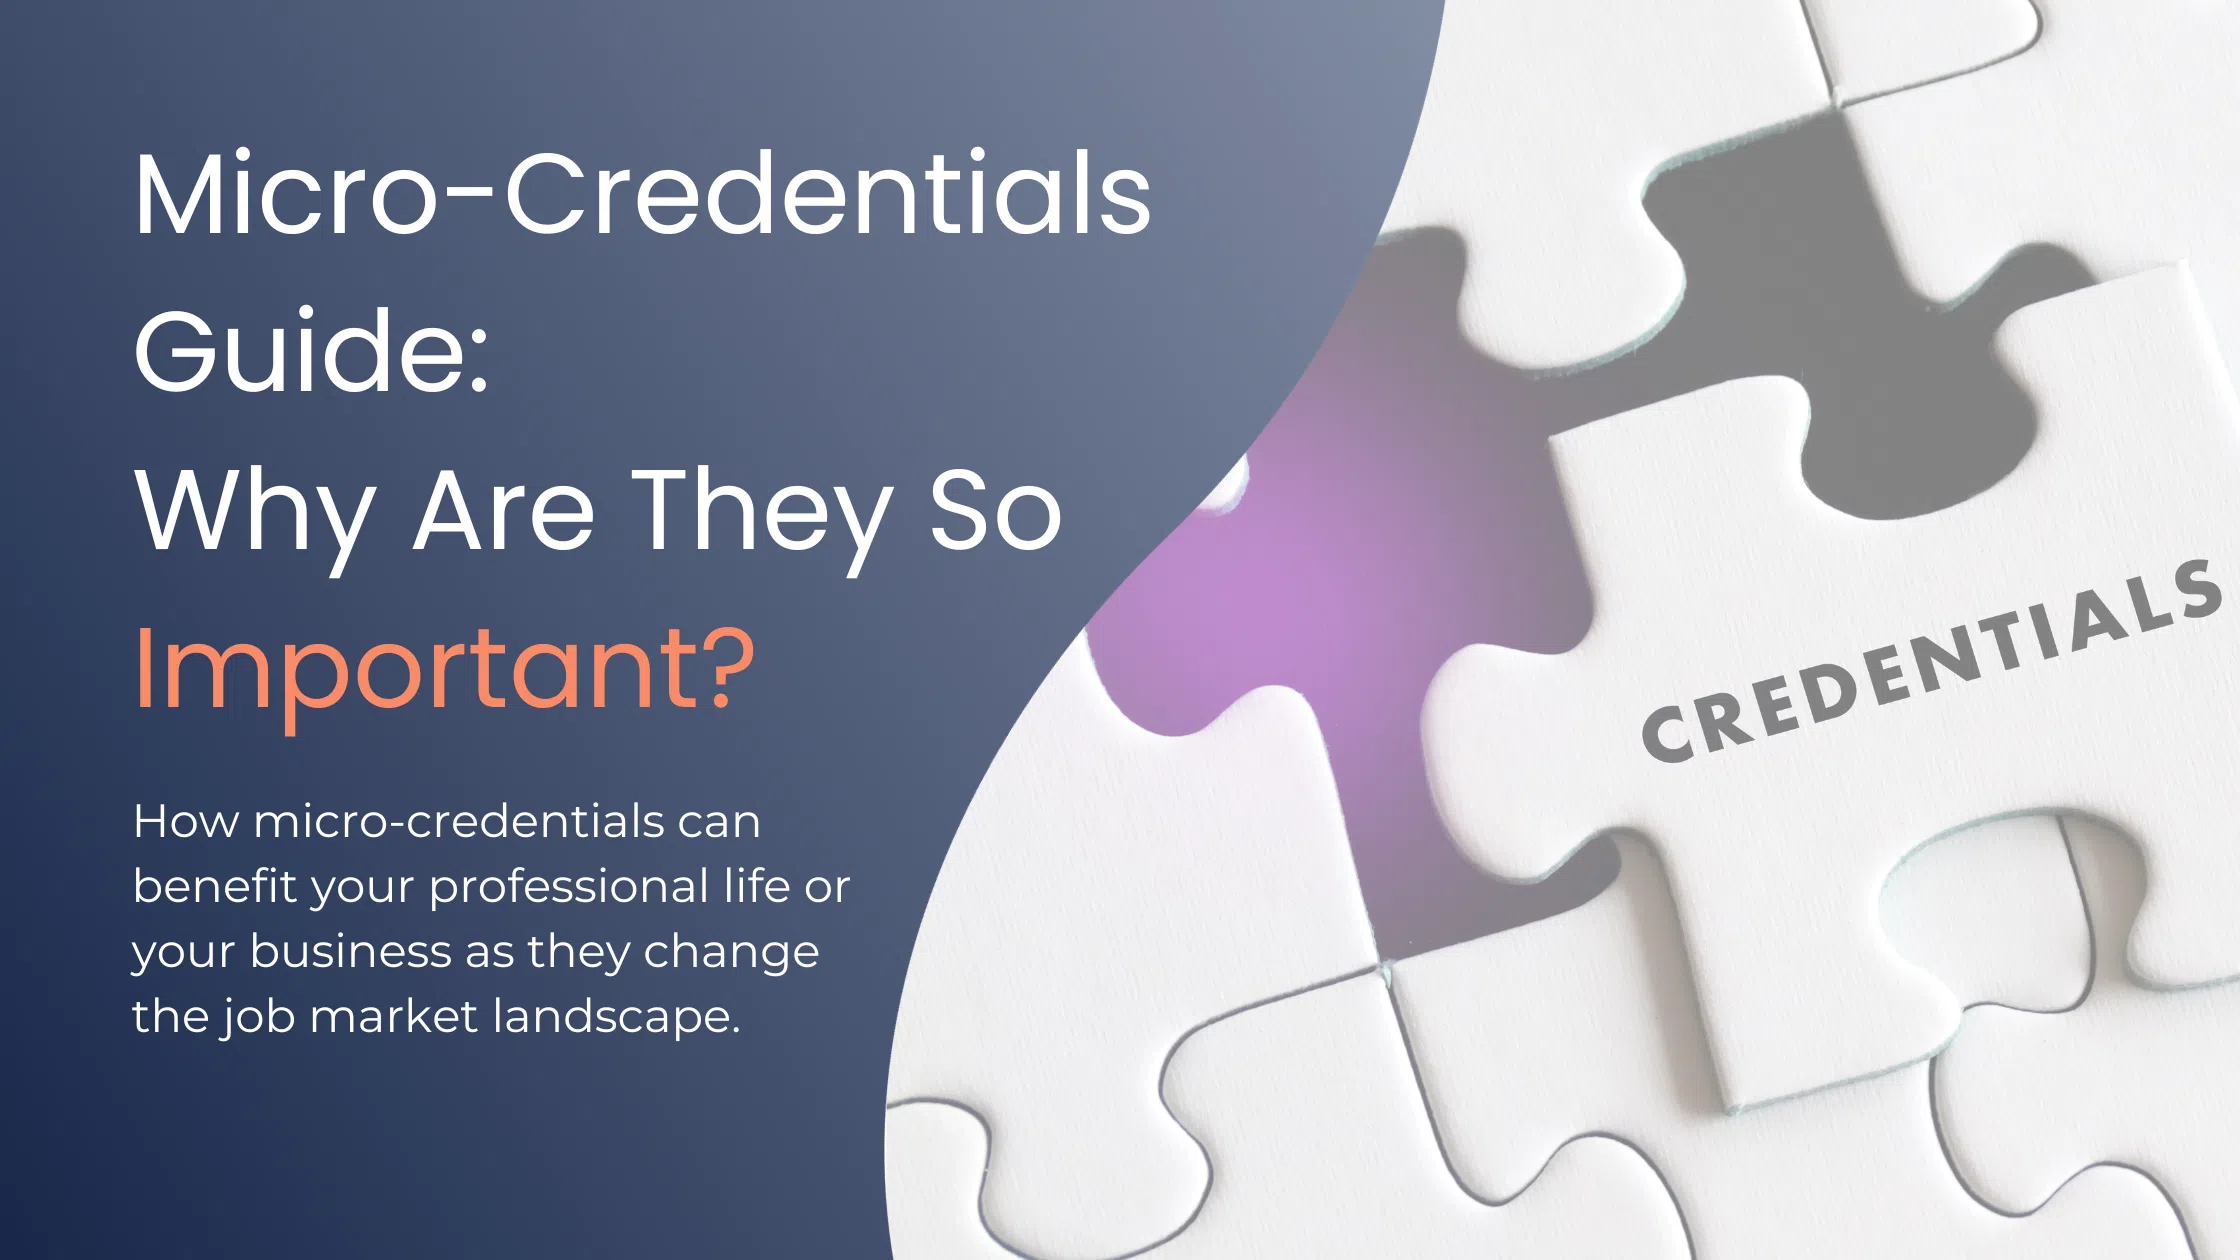 What are Micro-Credentials and Short-Term Programs?